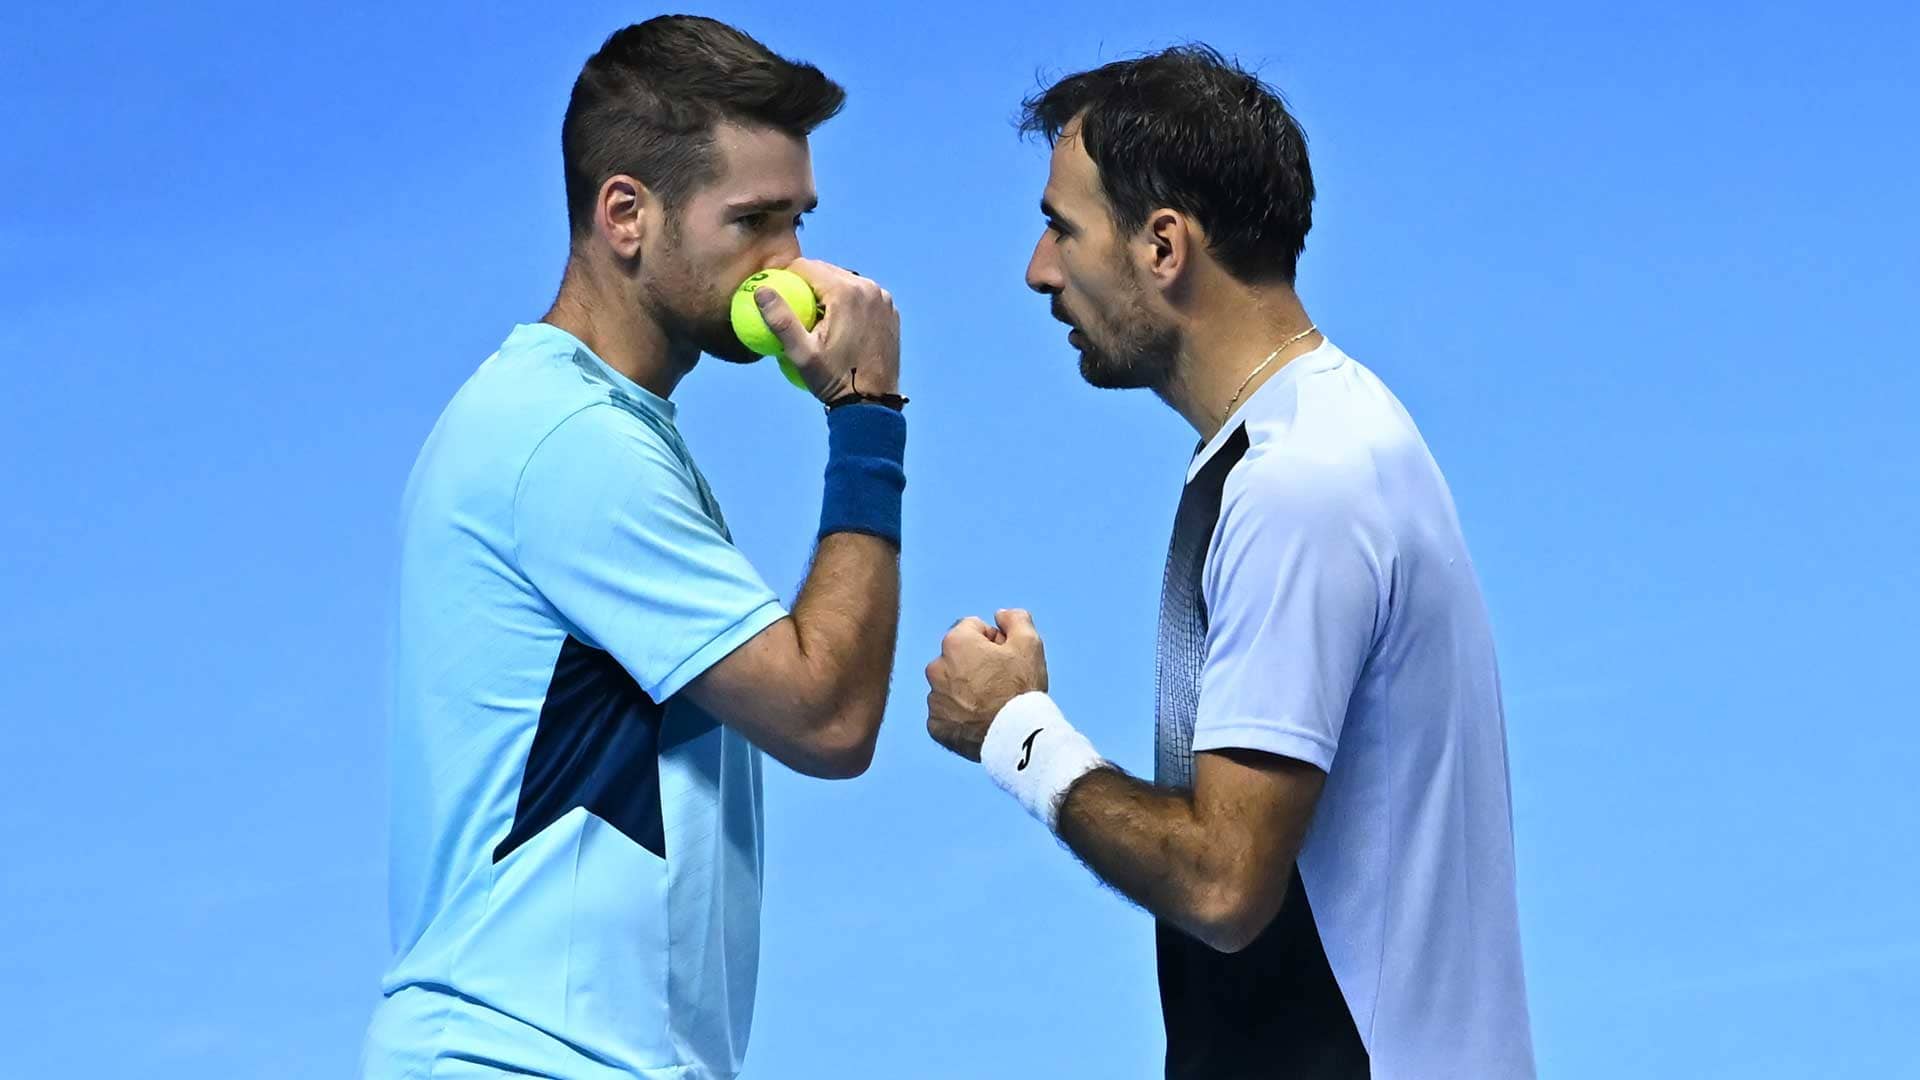 Austin Krajicek and Ivan Dodig are now 1-0 in Green Group play at the Nitto ATP Finals.